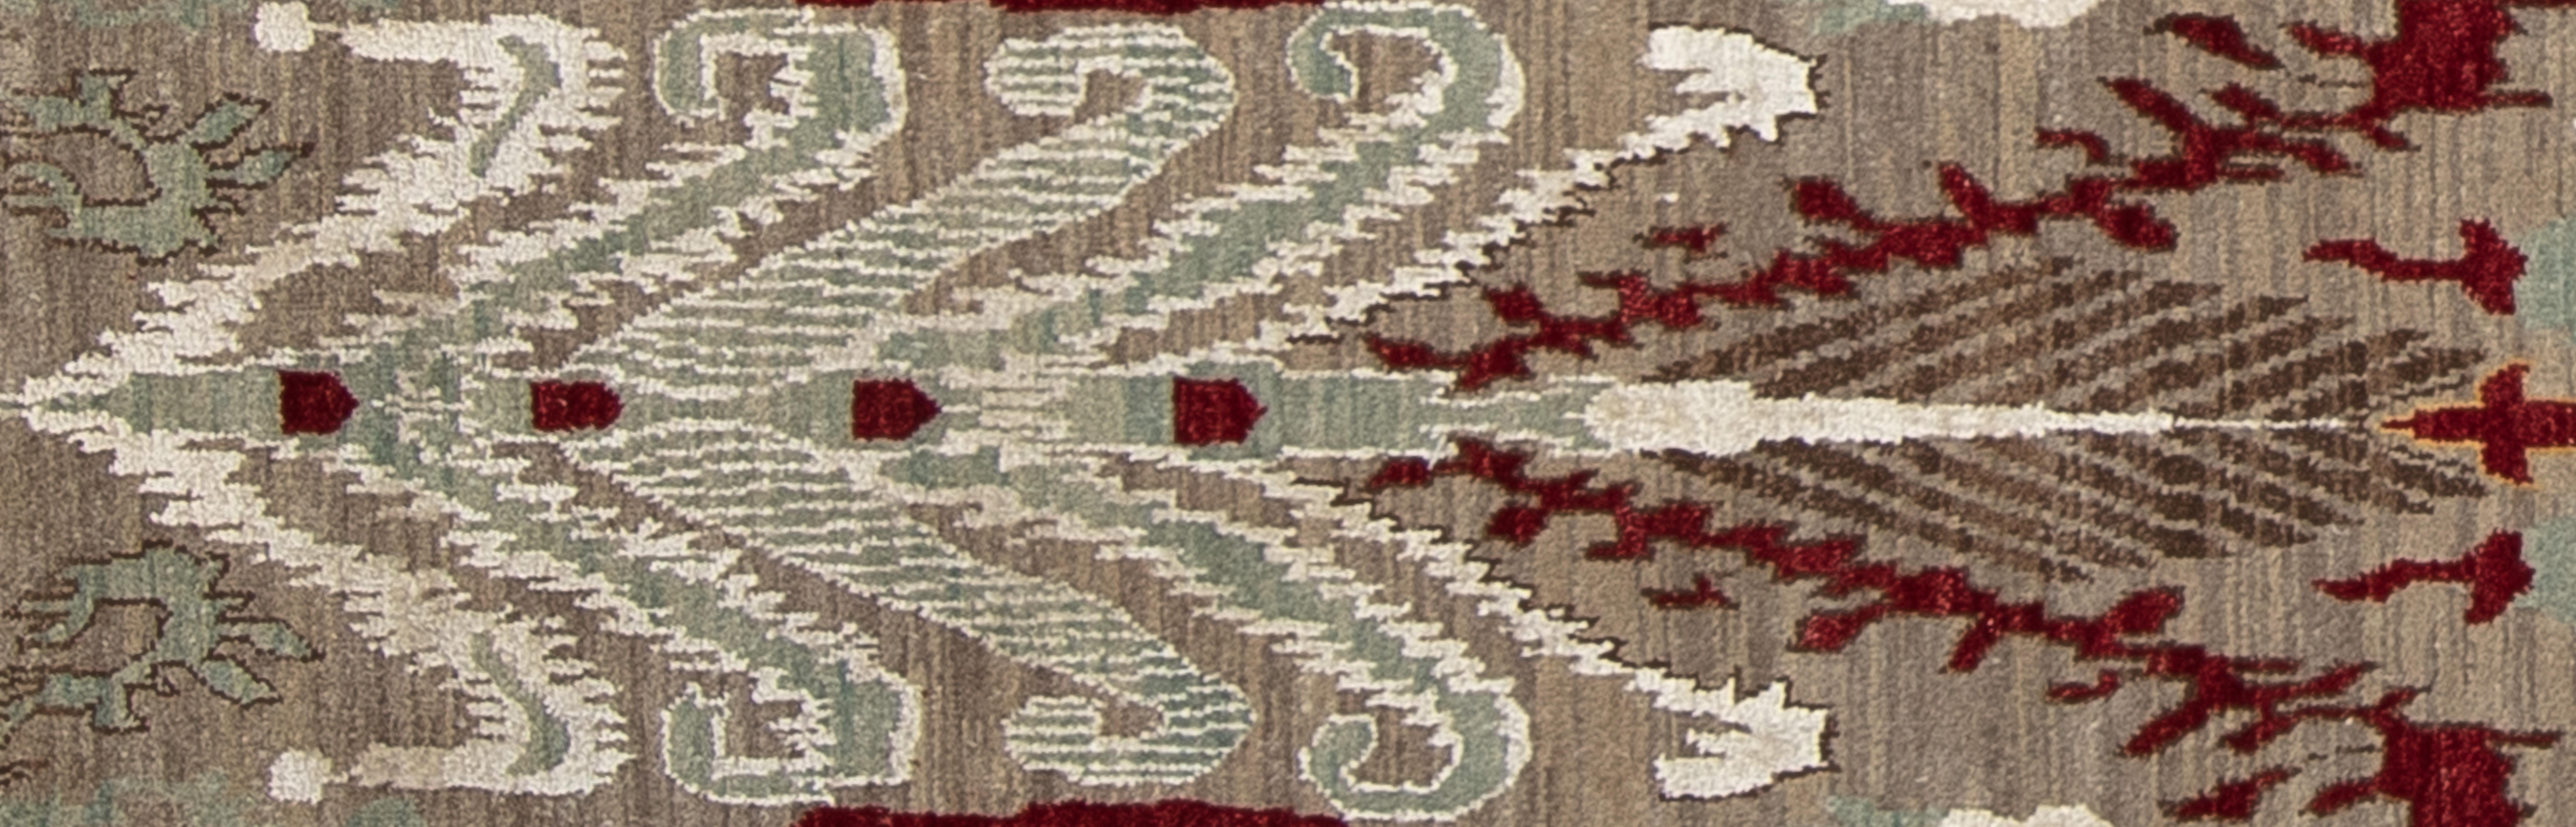 Indian 21st Century Contemporary Ikat Rug For Sale